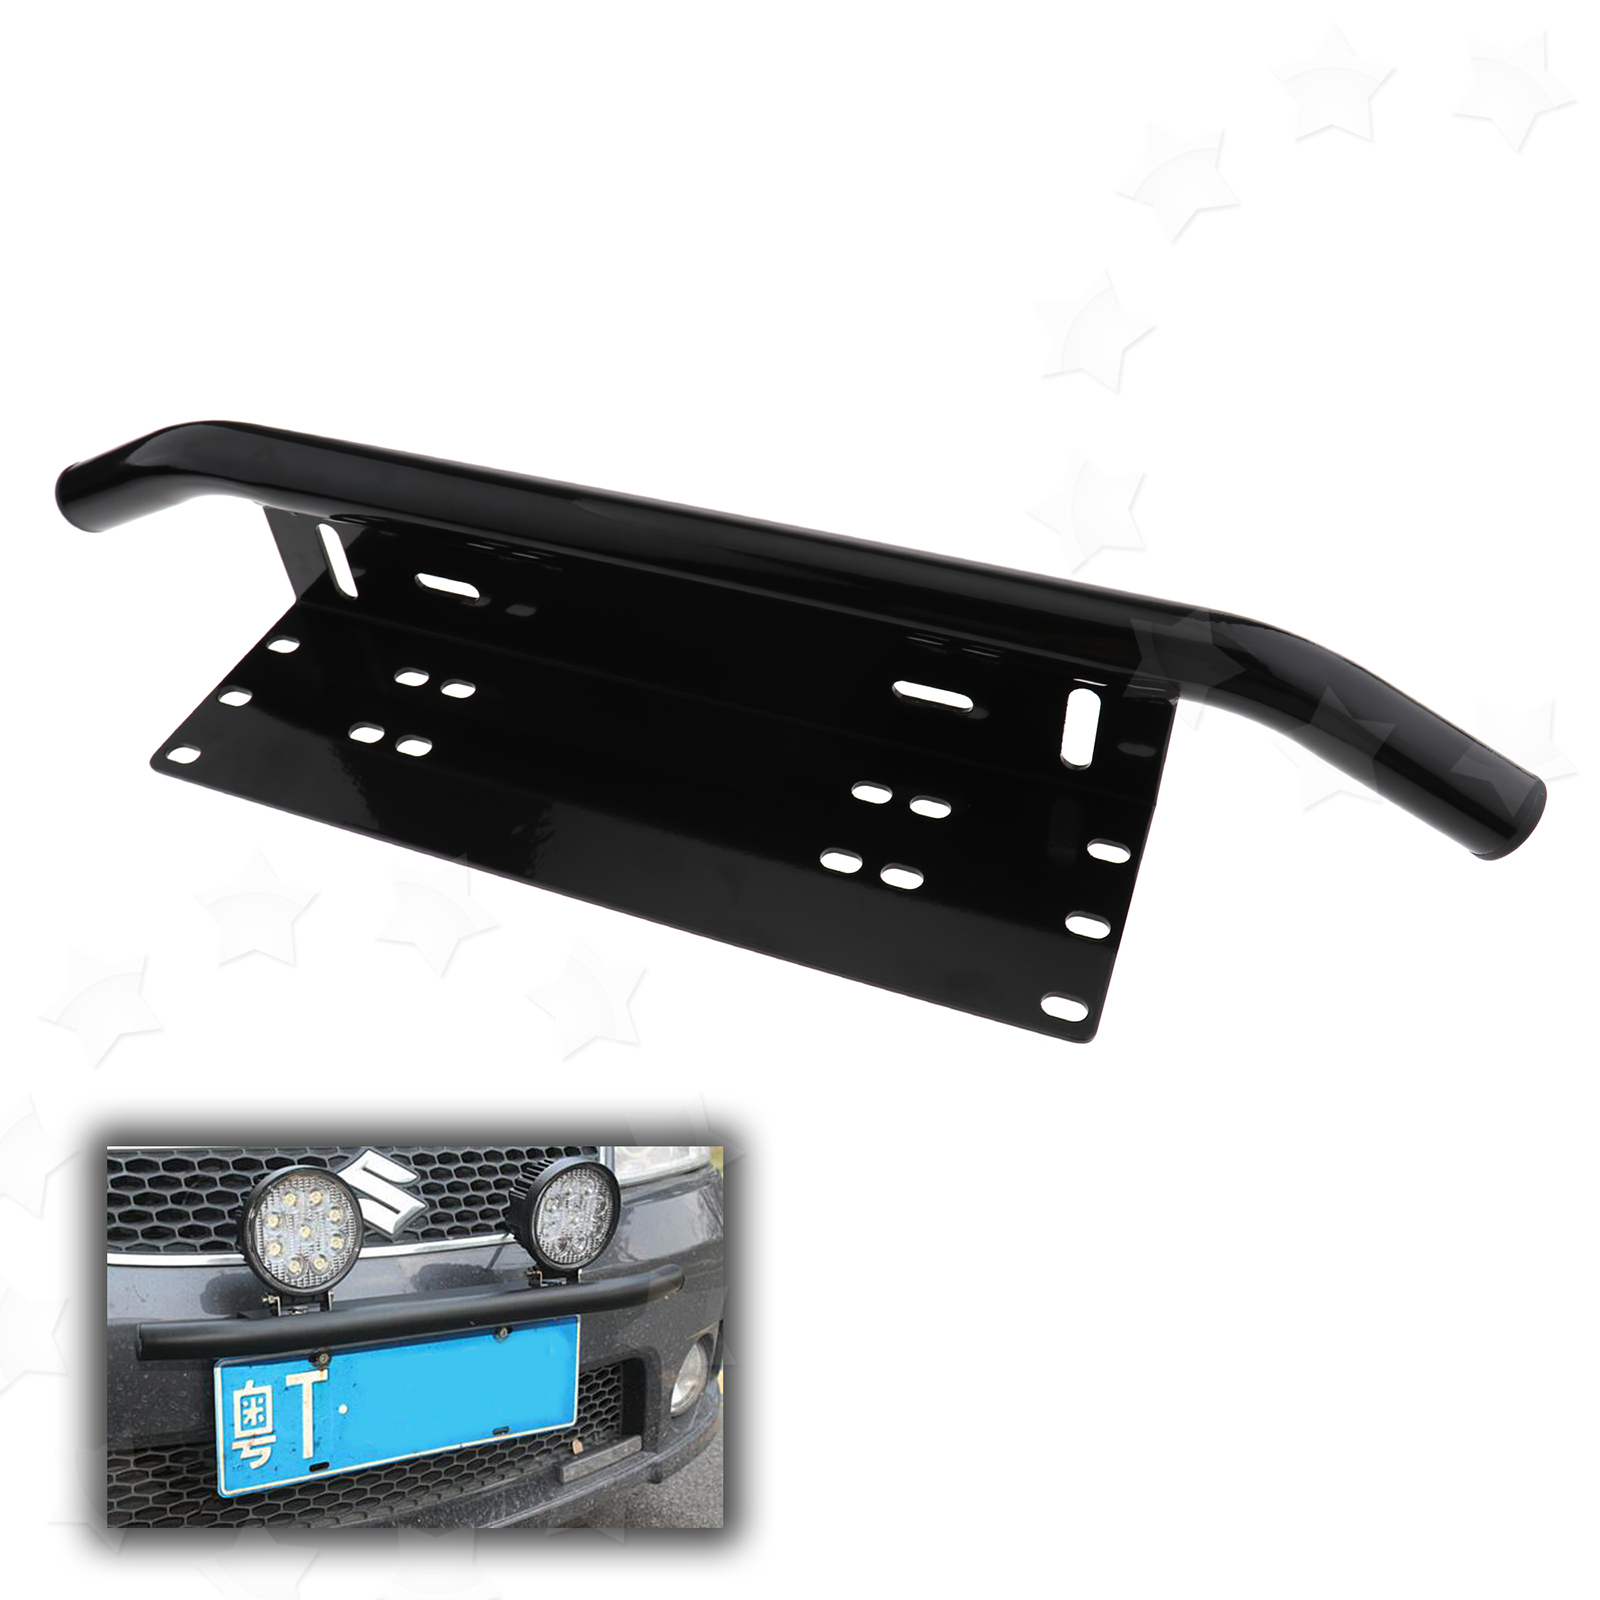 Aluminum Numbers Licence Plate Mount Bracket for LED Driving Light Bar Offroad